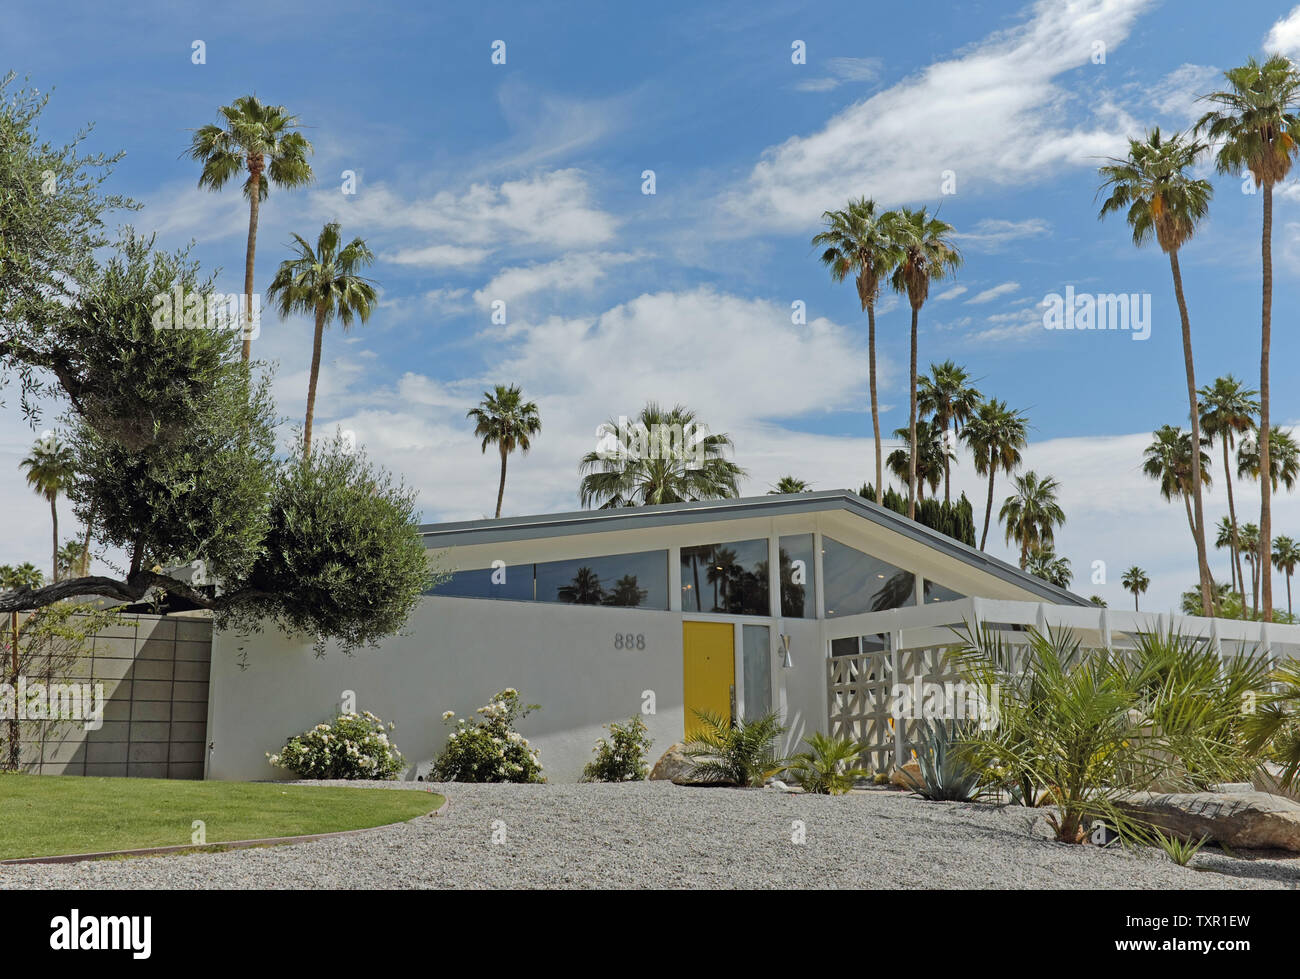 Mid-Century modernist designed home with yellow doors and breeze blocks in a desert house in Palm Springs, California, USA. Stock Photo